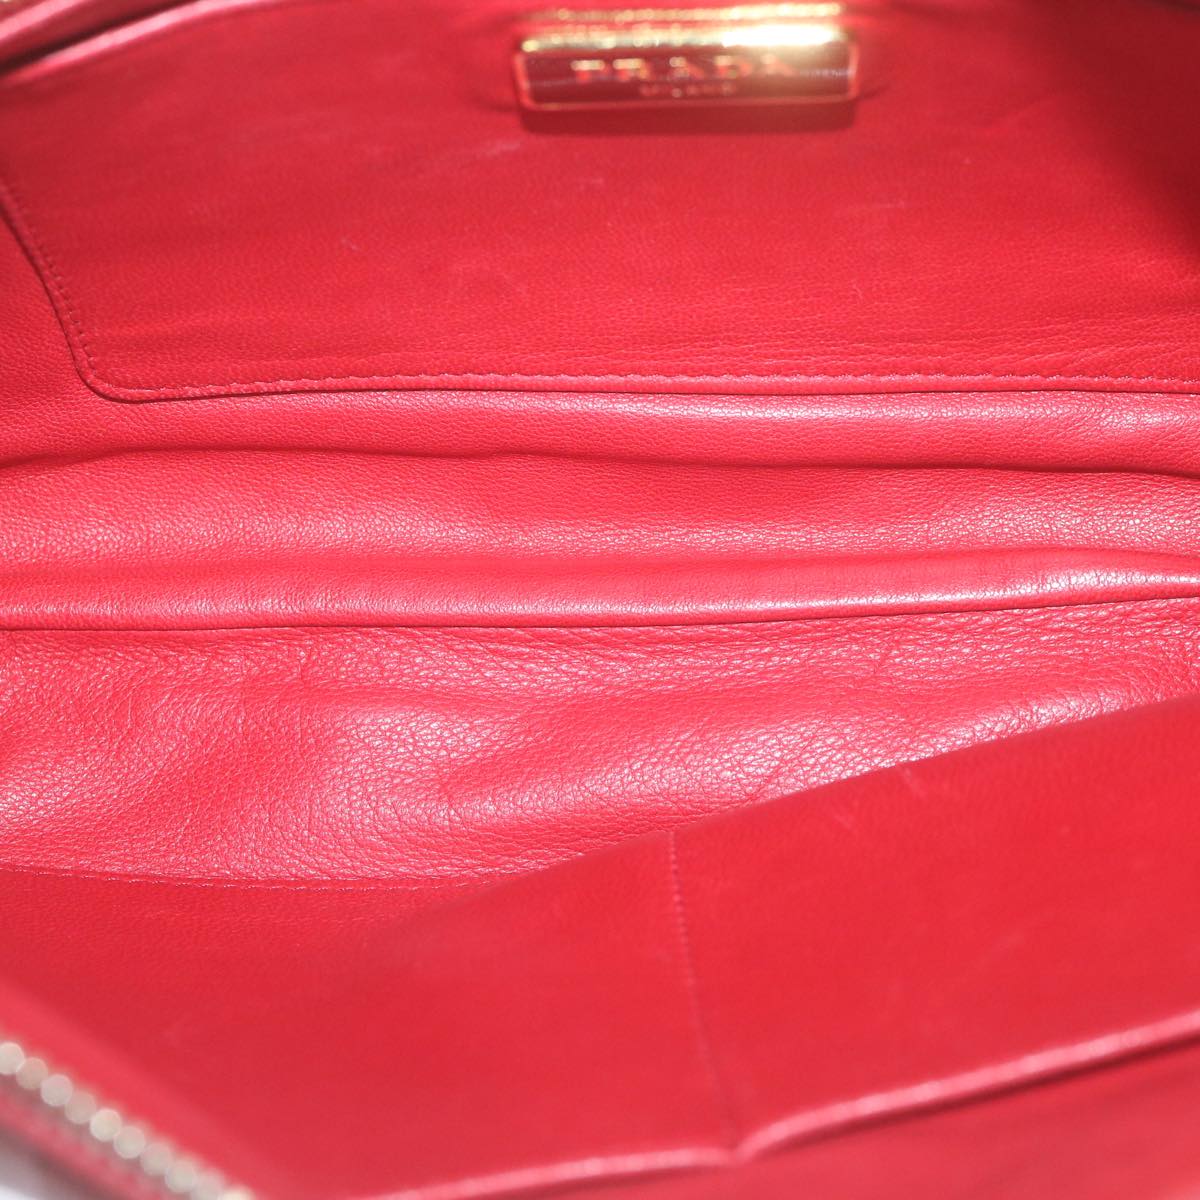 PRADA Clutch Bag Leather Red Auth bs11809